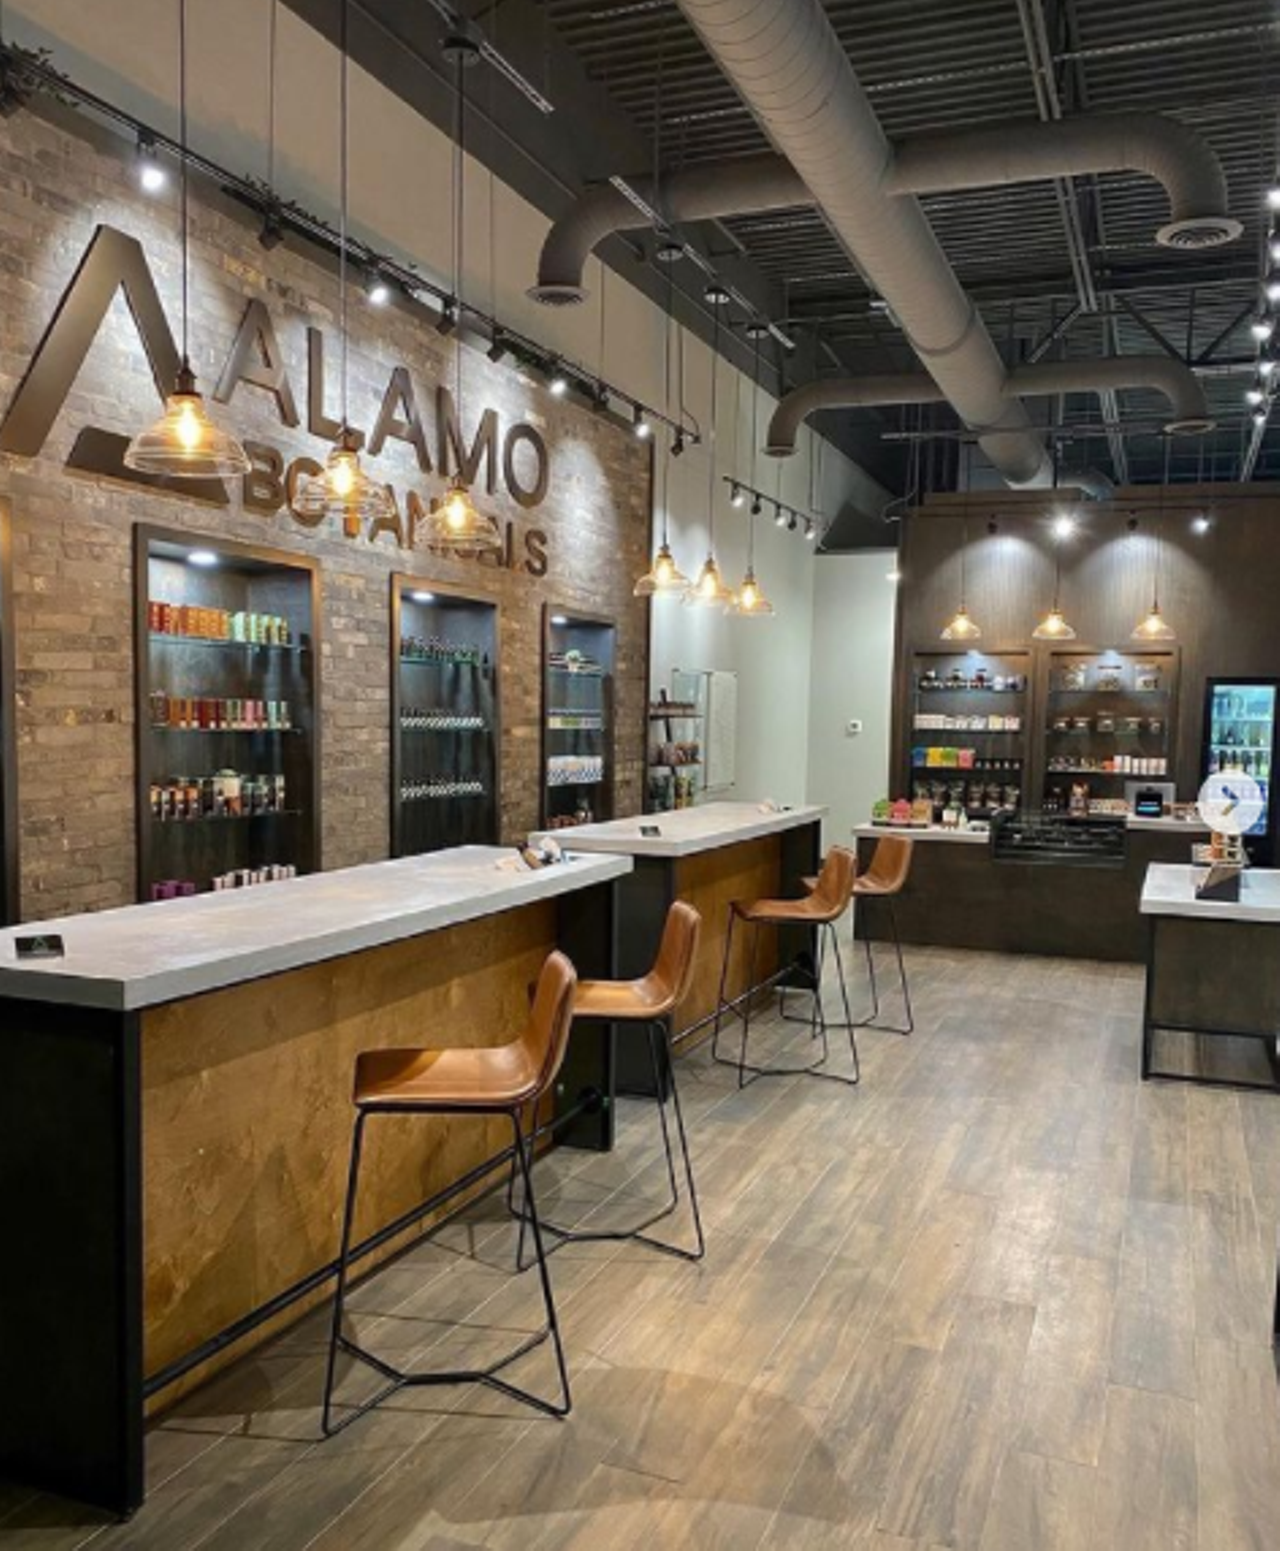 Alamo Botanicals
Multiple locations, alamobotanicals.com
Alamo Botanicals, which opened in 2017, was the first Hemp/CBD store in Texas and one of the first in the country, making it an industry pioneer.
Photo via Instagram / alamobotanicals